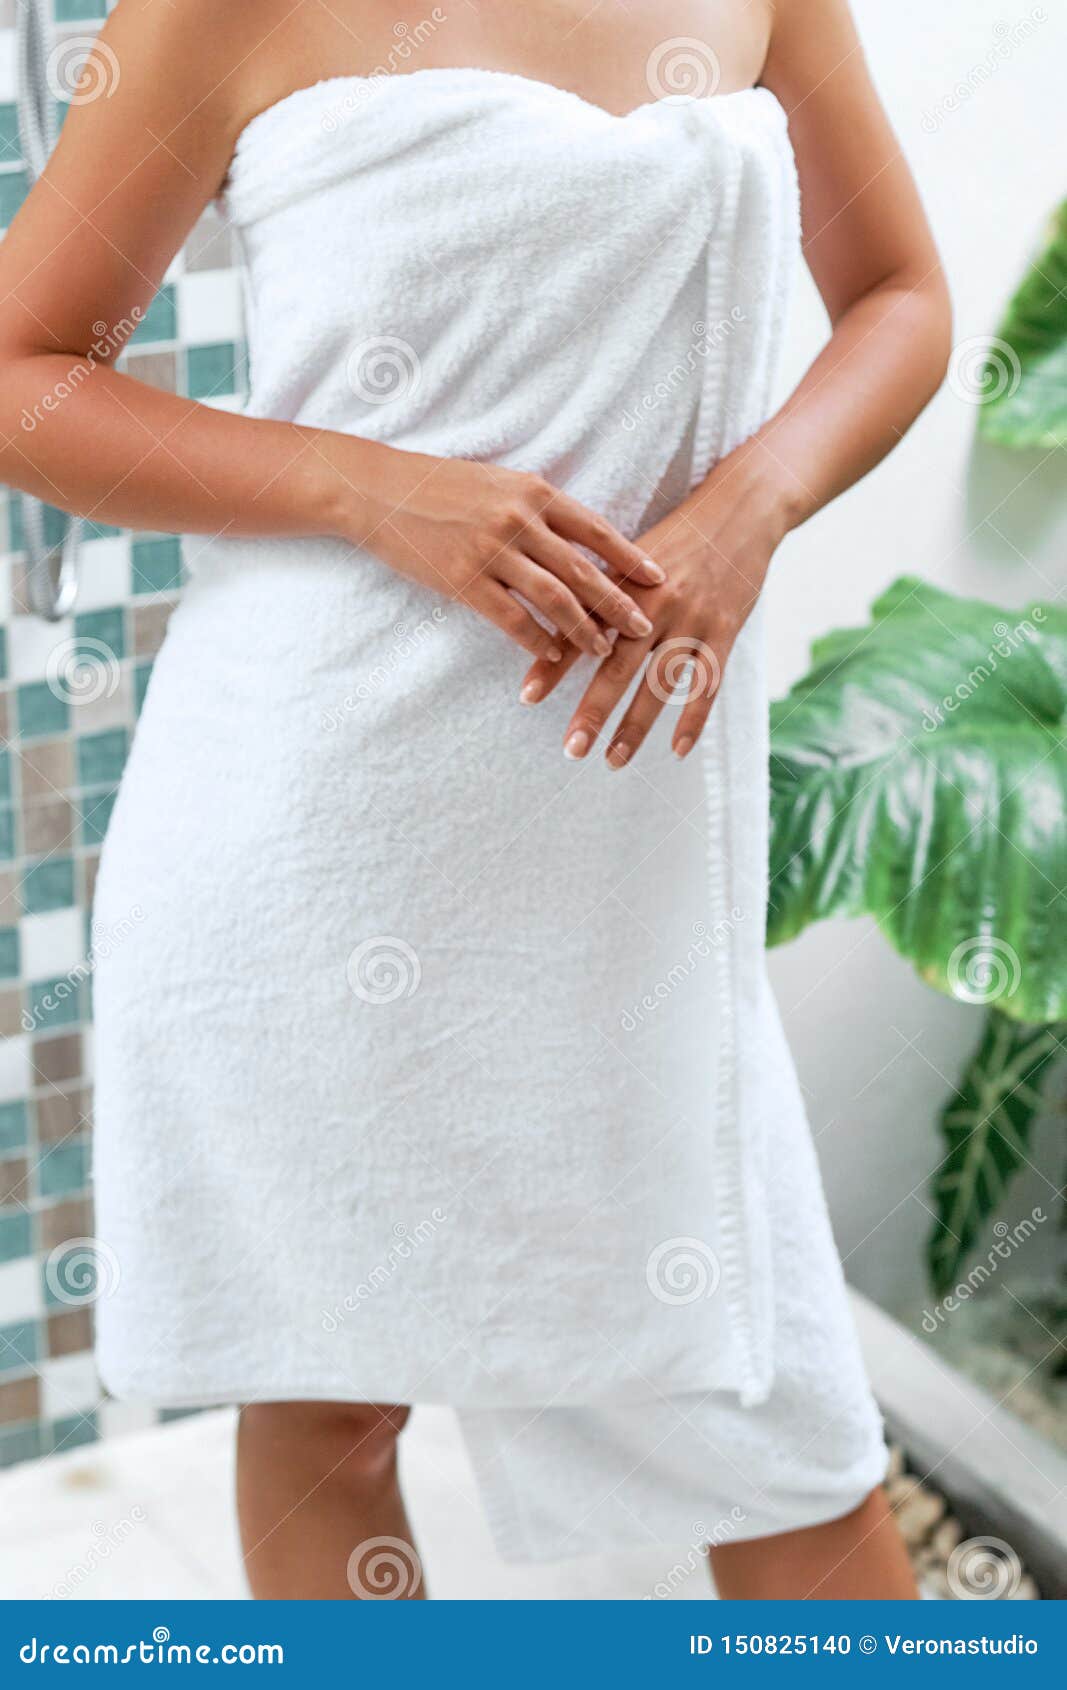 https://thumbs.dreamstime.com/z/woman-bath-towel-girl-shows-hands-form-heart-skin-care-woman-bath-towel-girl-shows-hands-form-heart-150825140.jpg